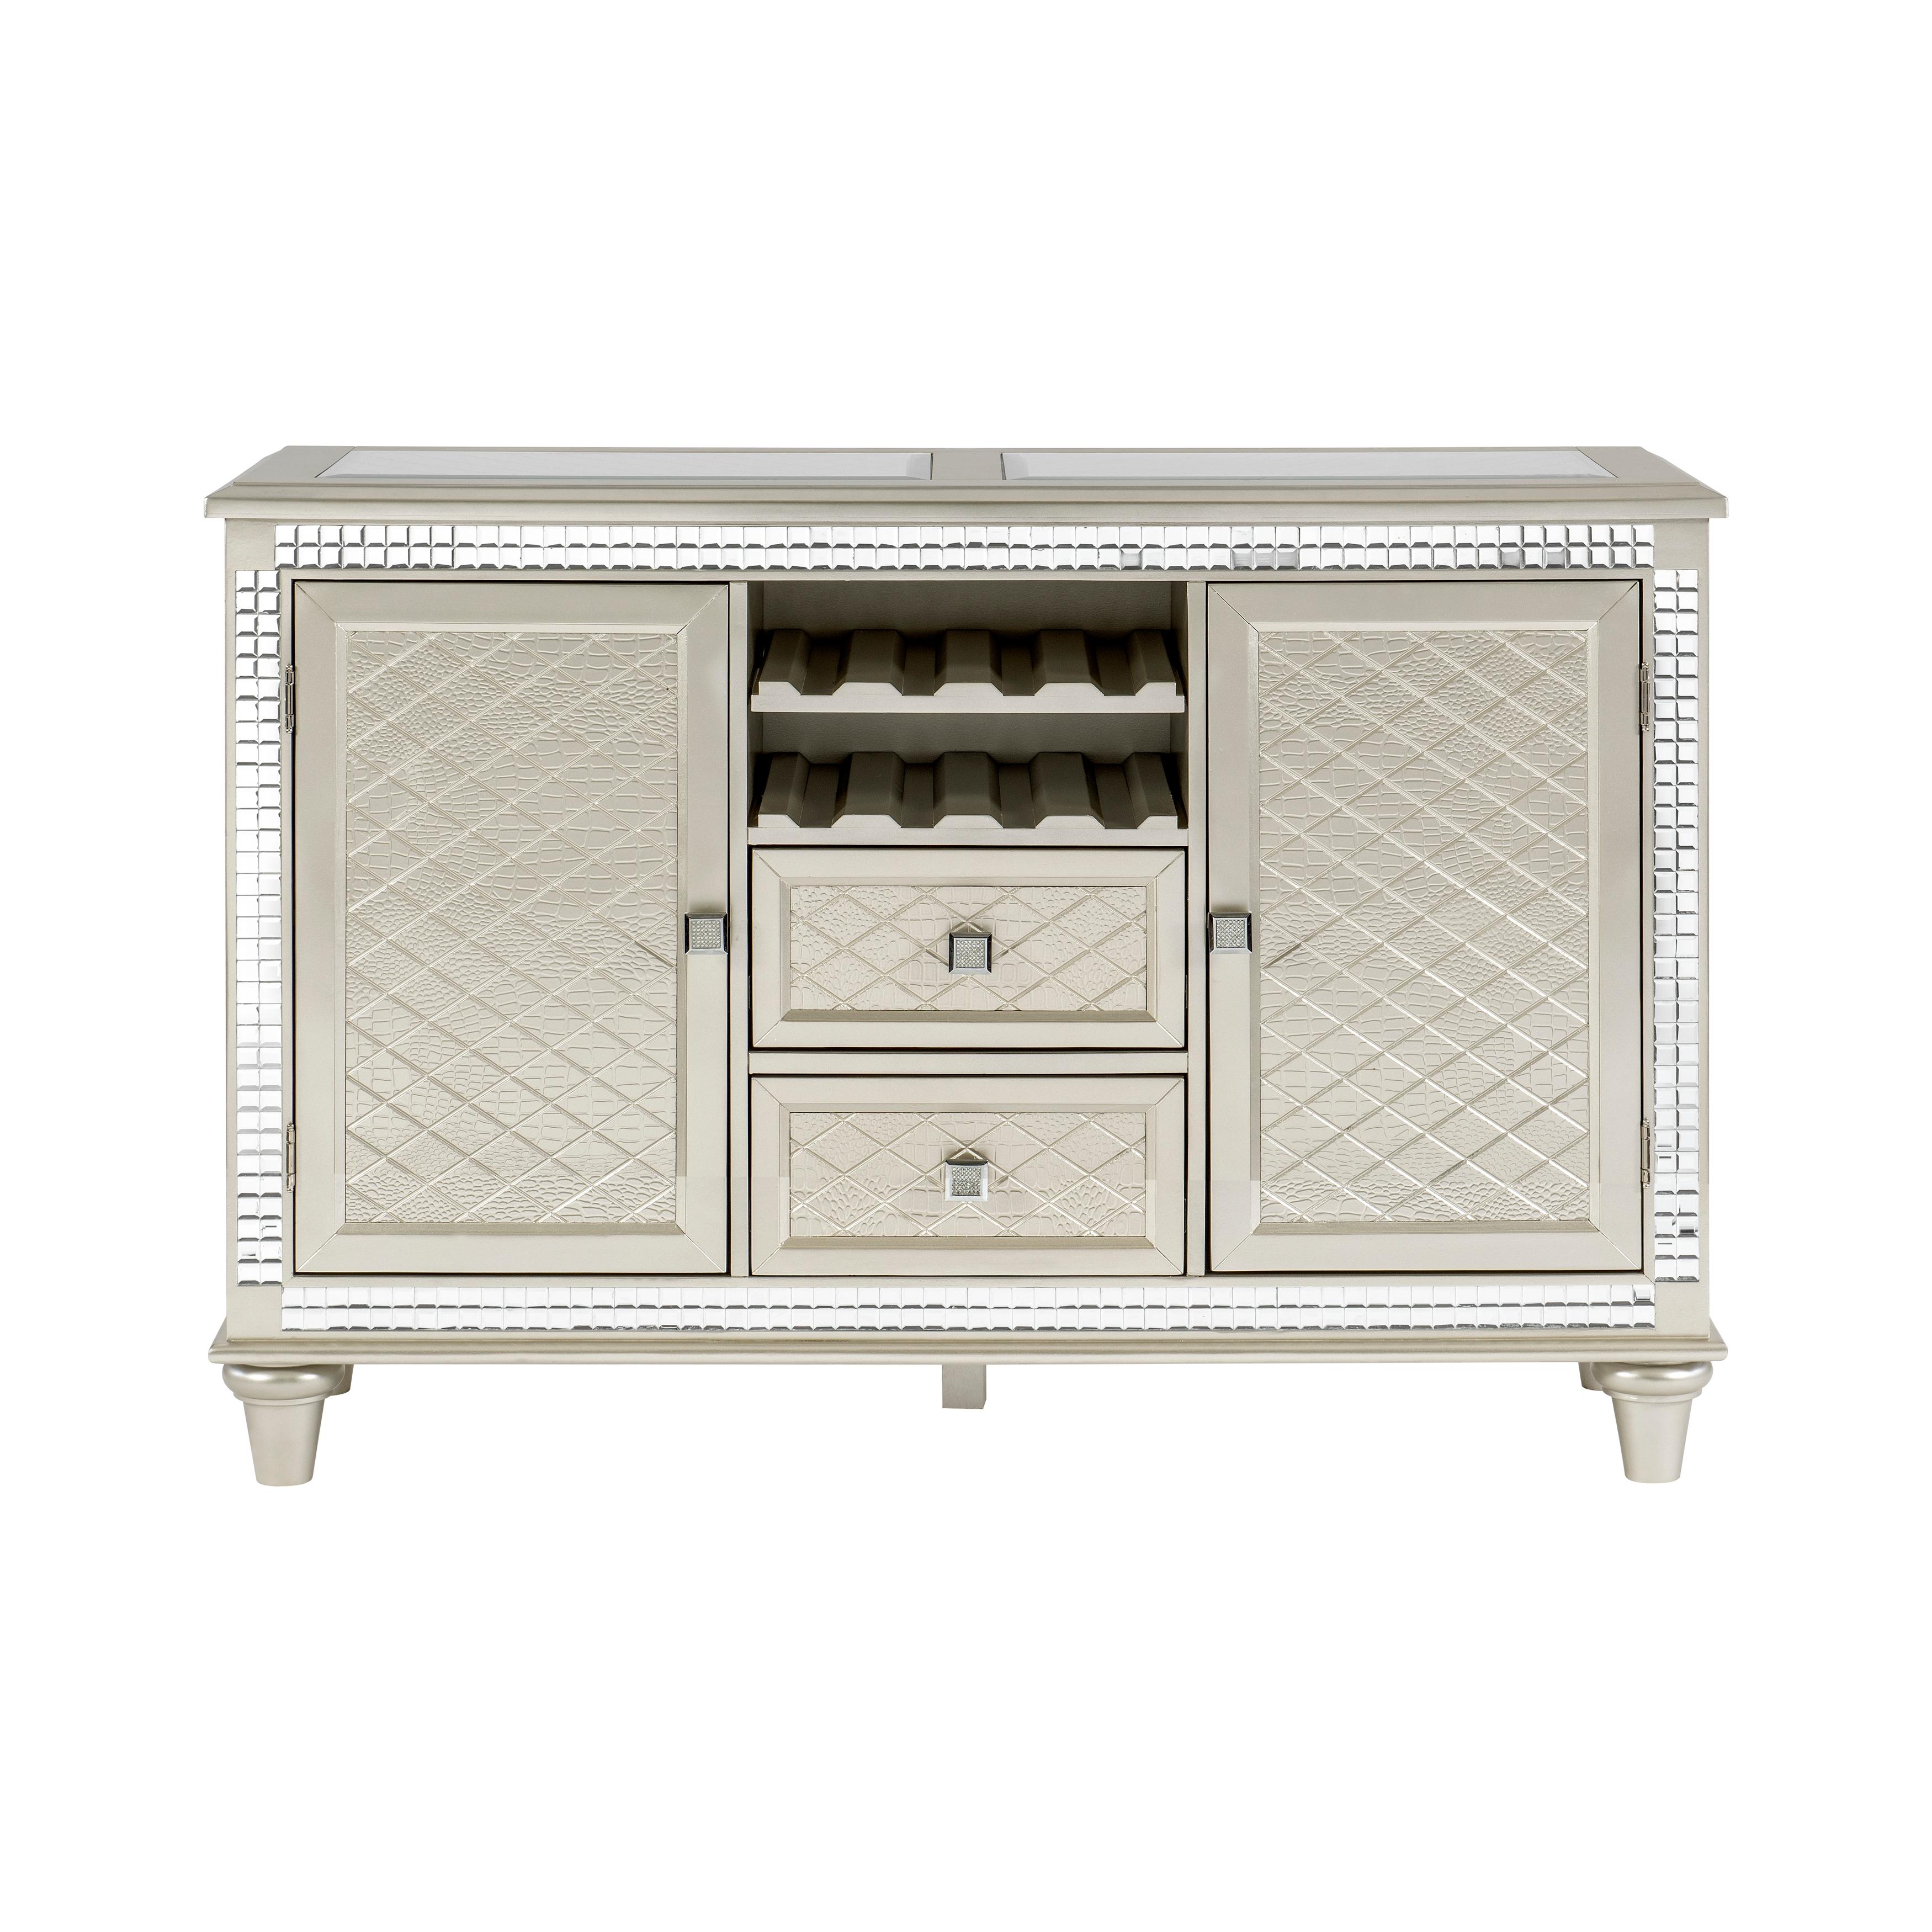 Traditional Server Juliette Collection Server 5844-40-S 5844-40-S in Champagne 